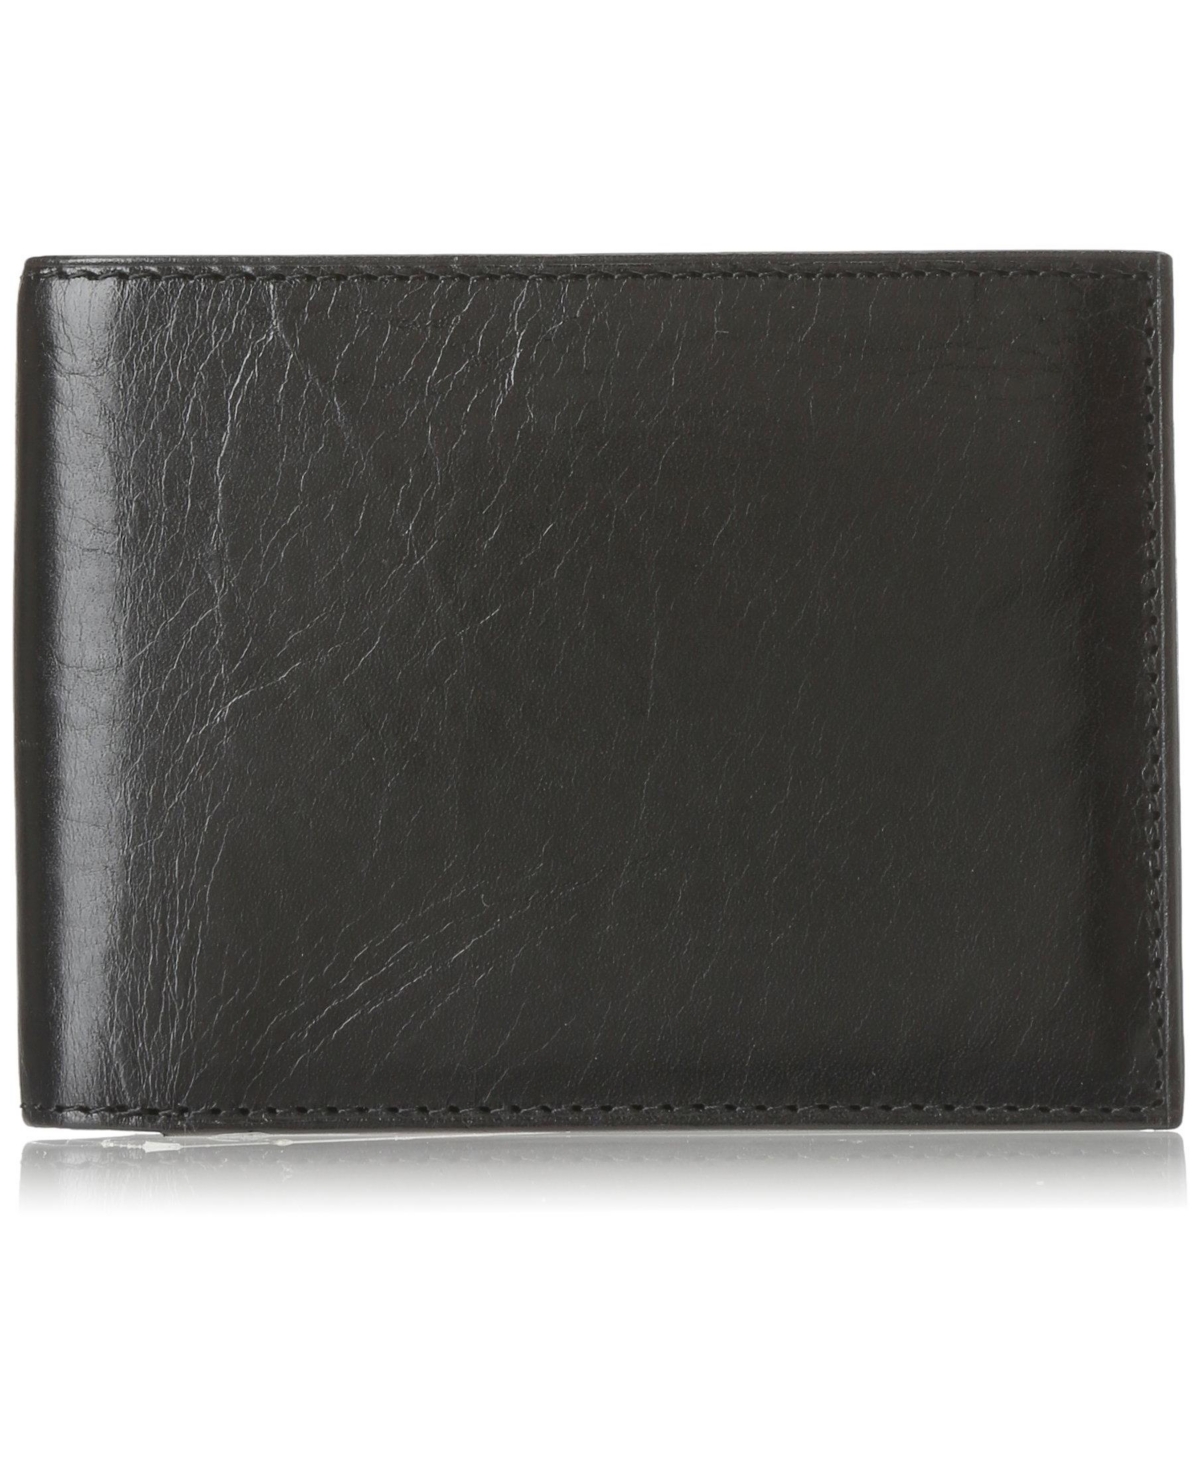 Men's Wallet, Old Leather Continental Bifold Wallet with I.d. Flap - Black